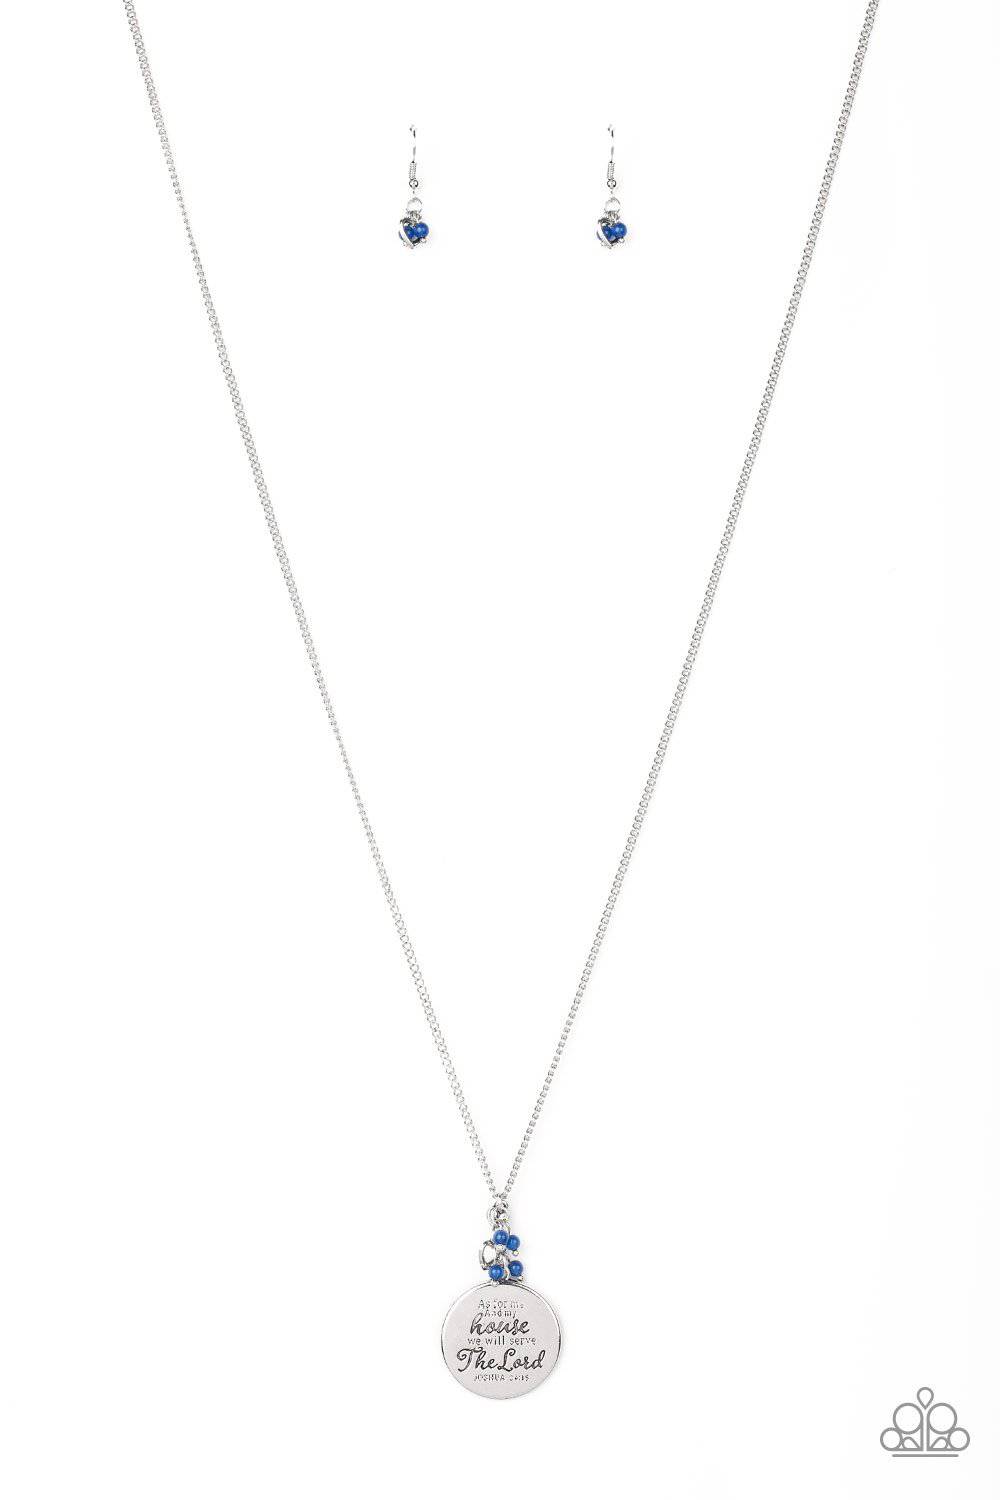 As for Me - Blue - GlaMarous Titi Jewels